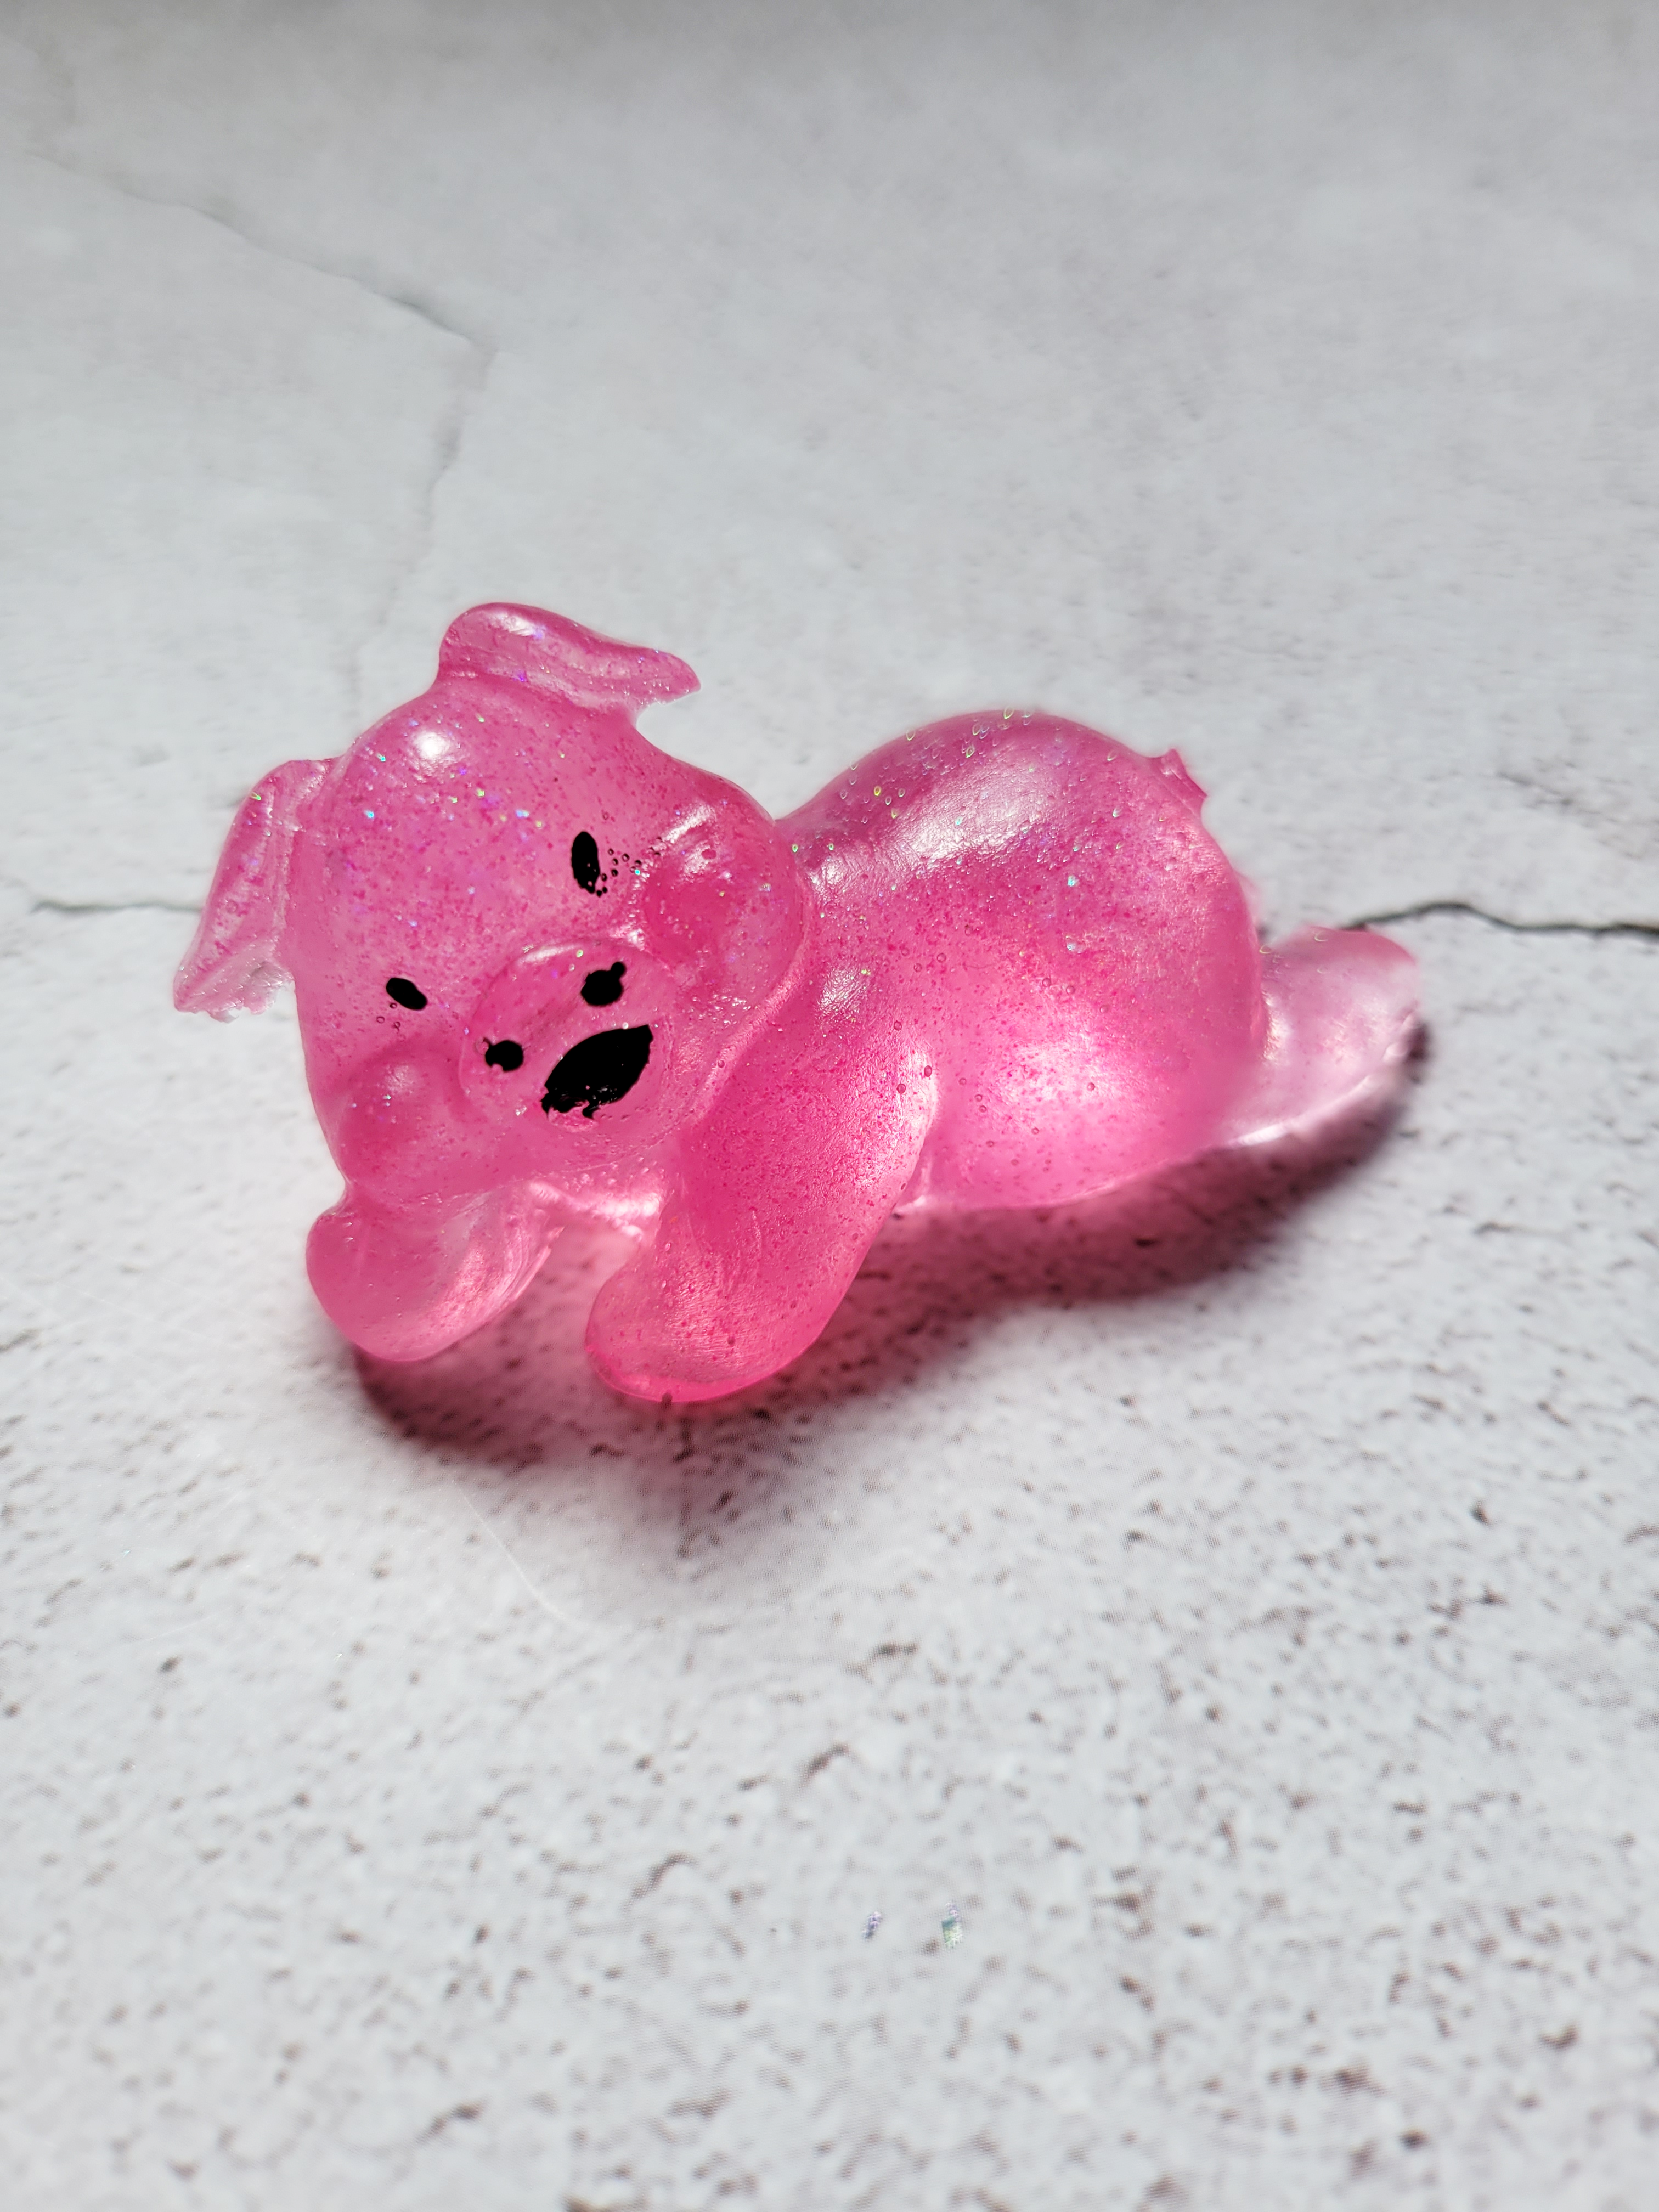 A front view of a lounging pig figure. It has black painted eyes, nose, and mouth. It's pink with glitter throughout.